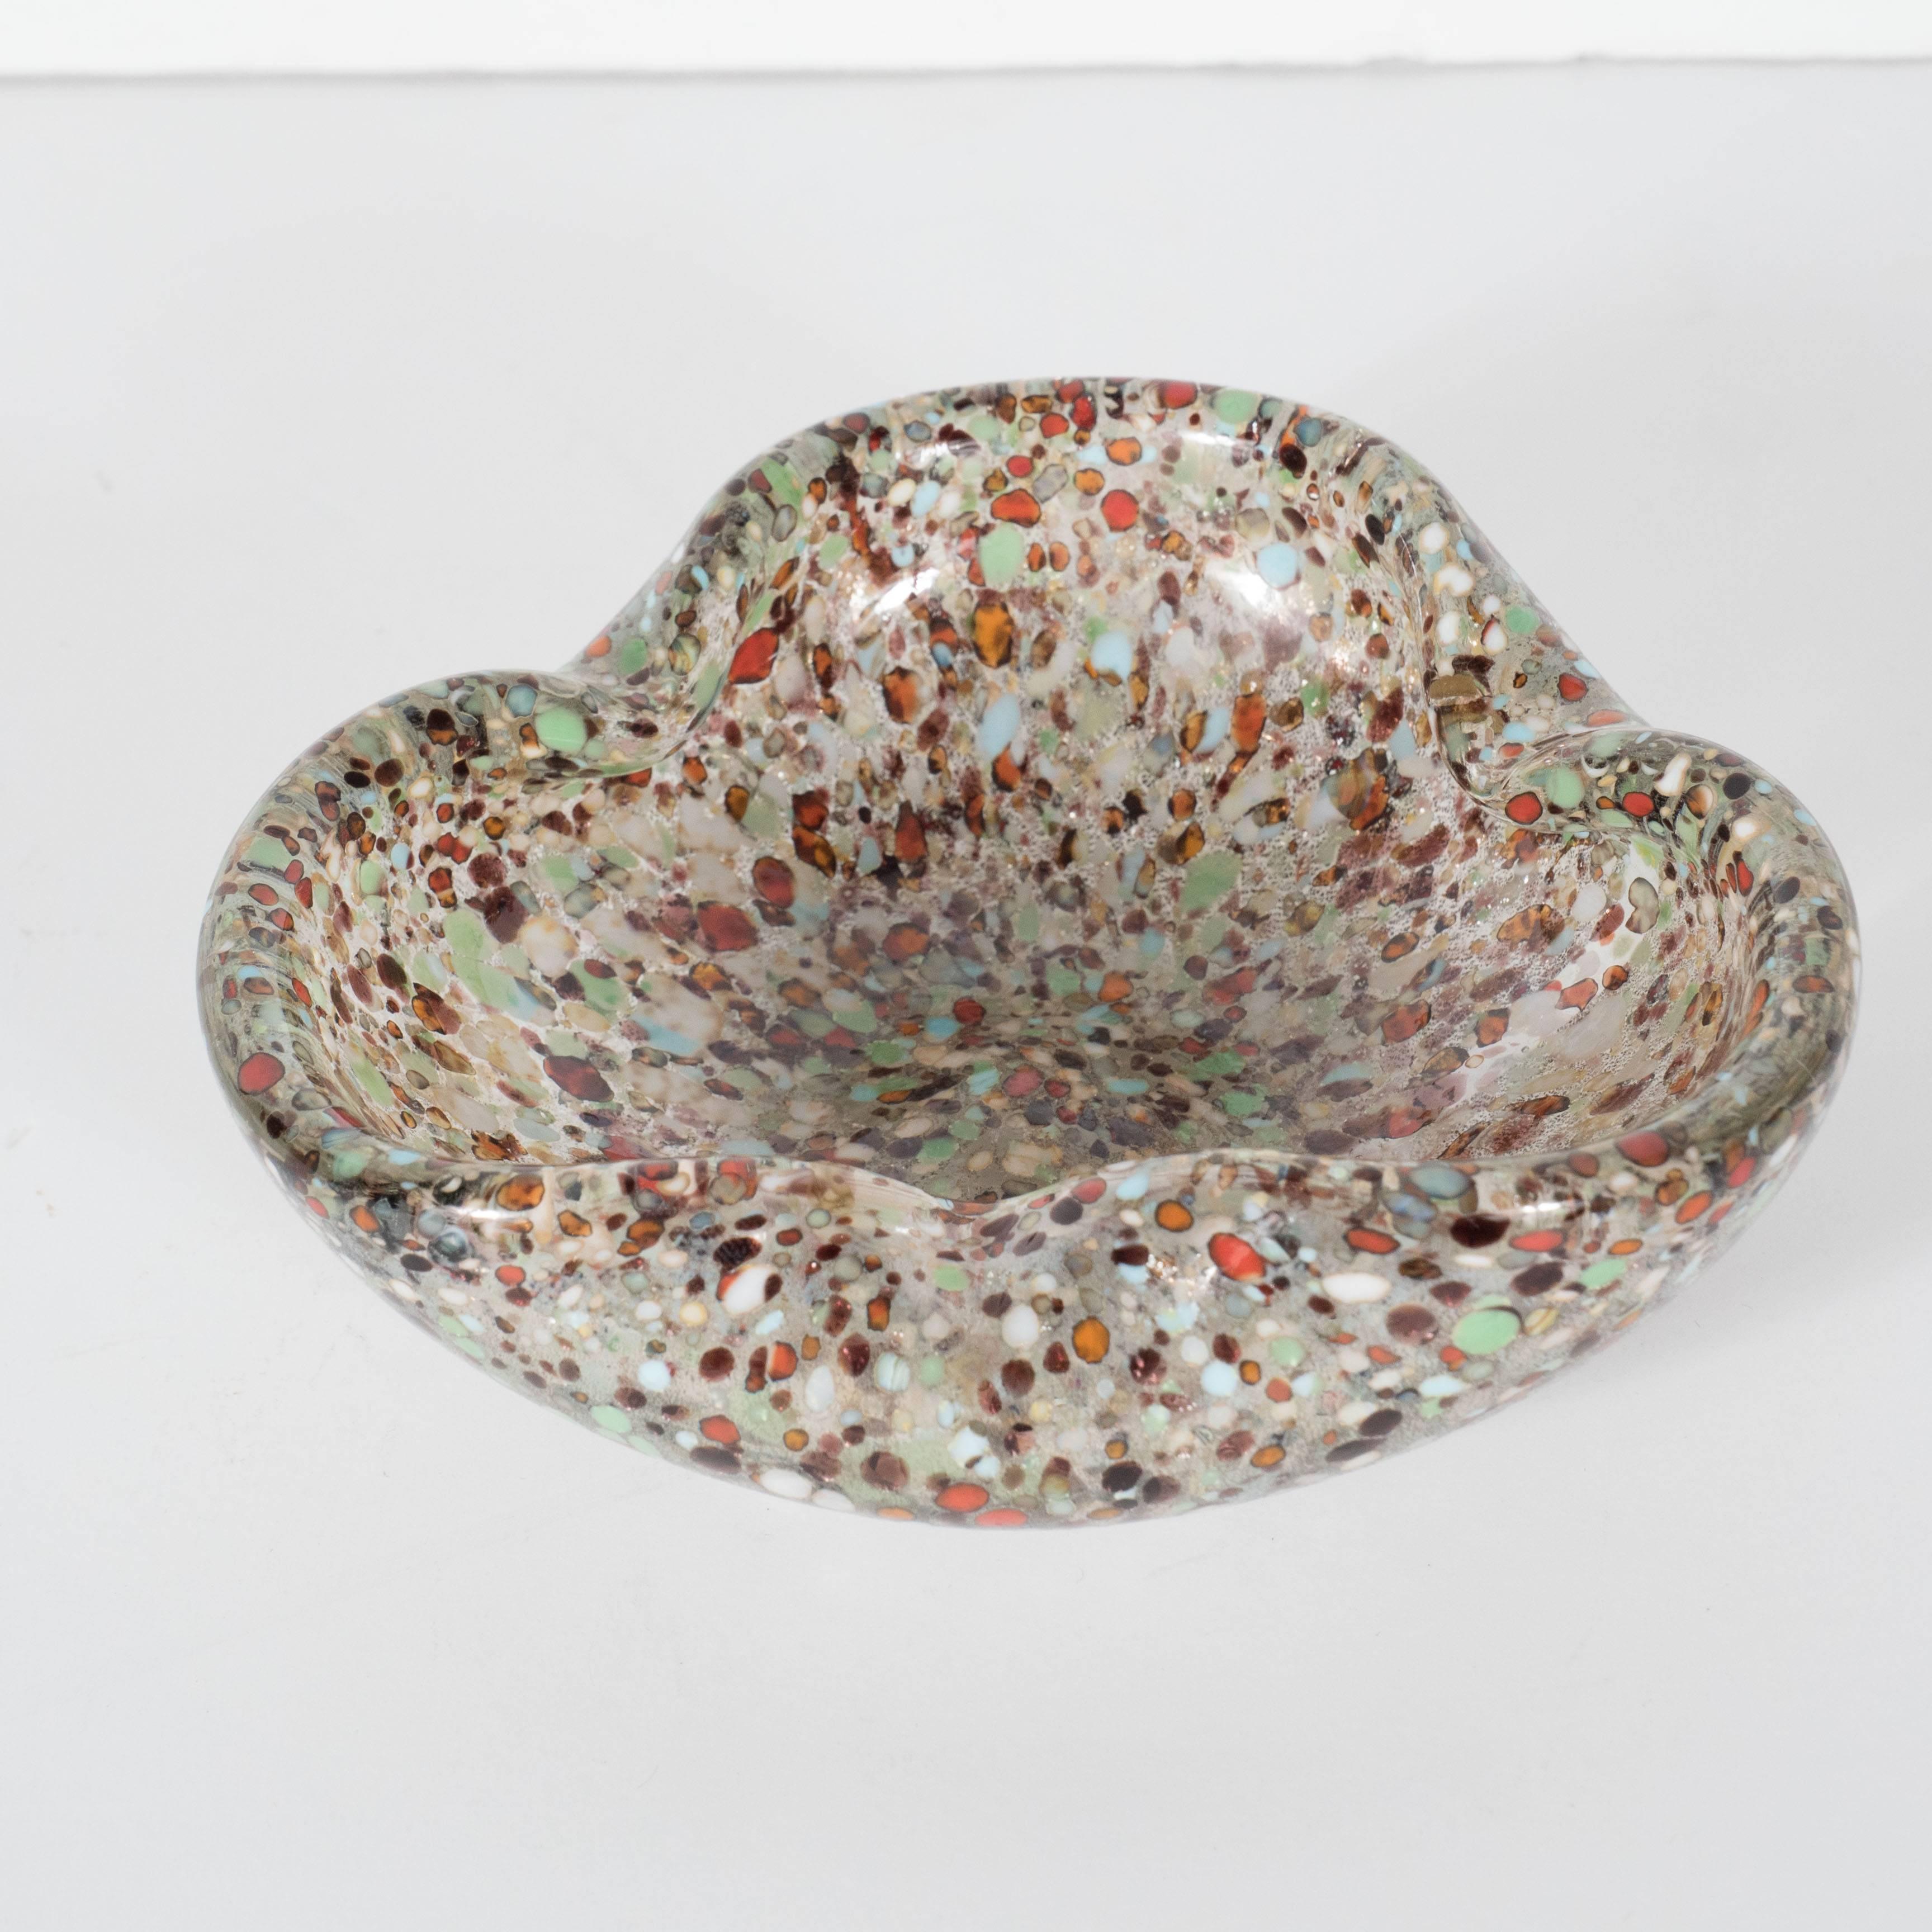 This handblown Murano glass bowl or ashtray features a folded two-fold design. It is made of speckled sea green, burnt orange, pearl, midnight blue all in smoked glass. A wonderful accent piece that will blend well with any decor. Excellent